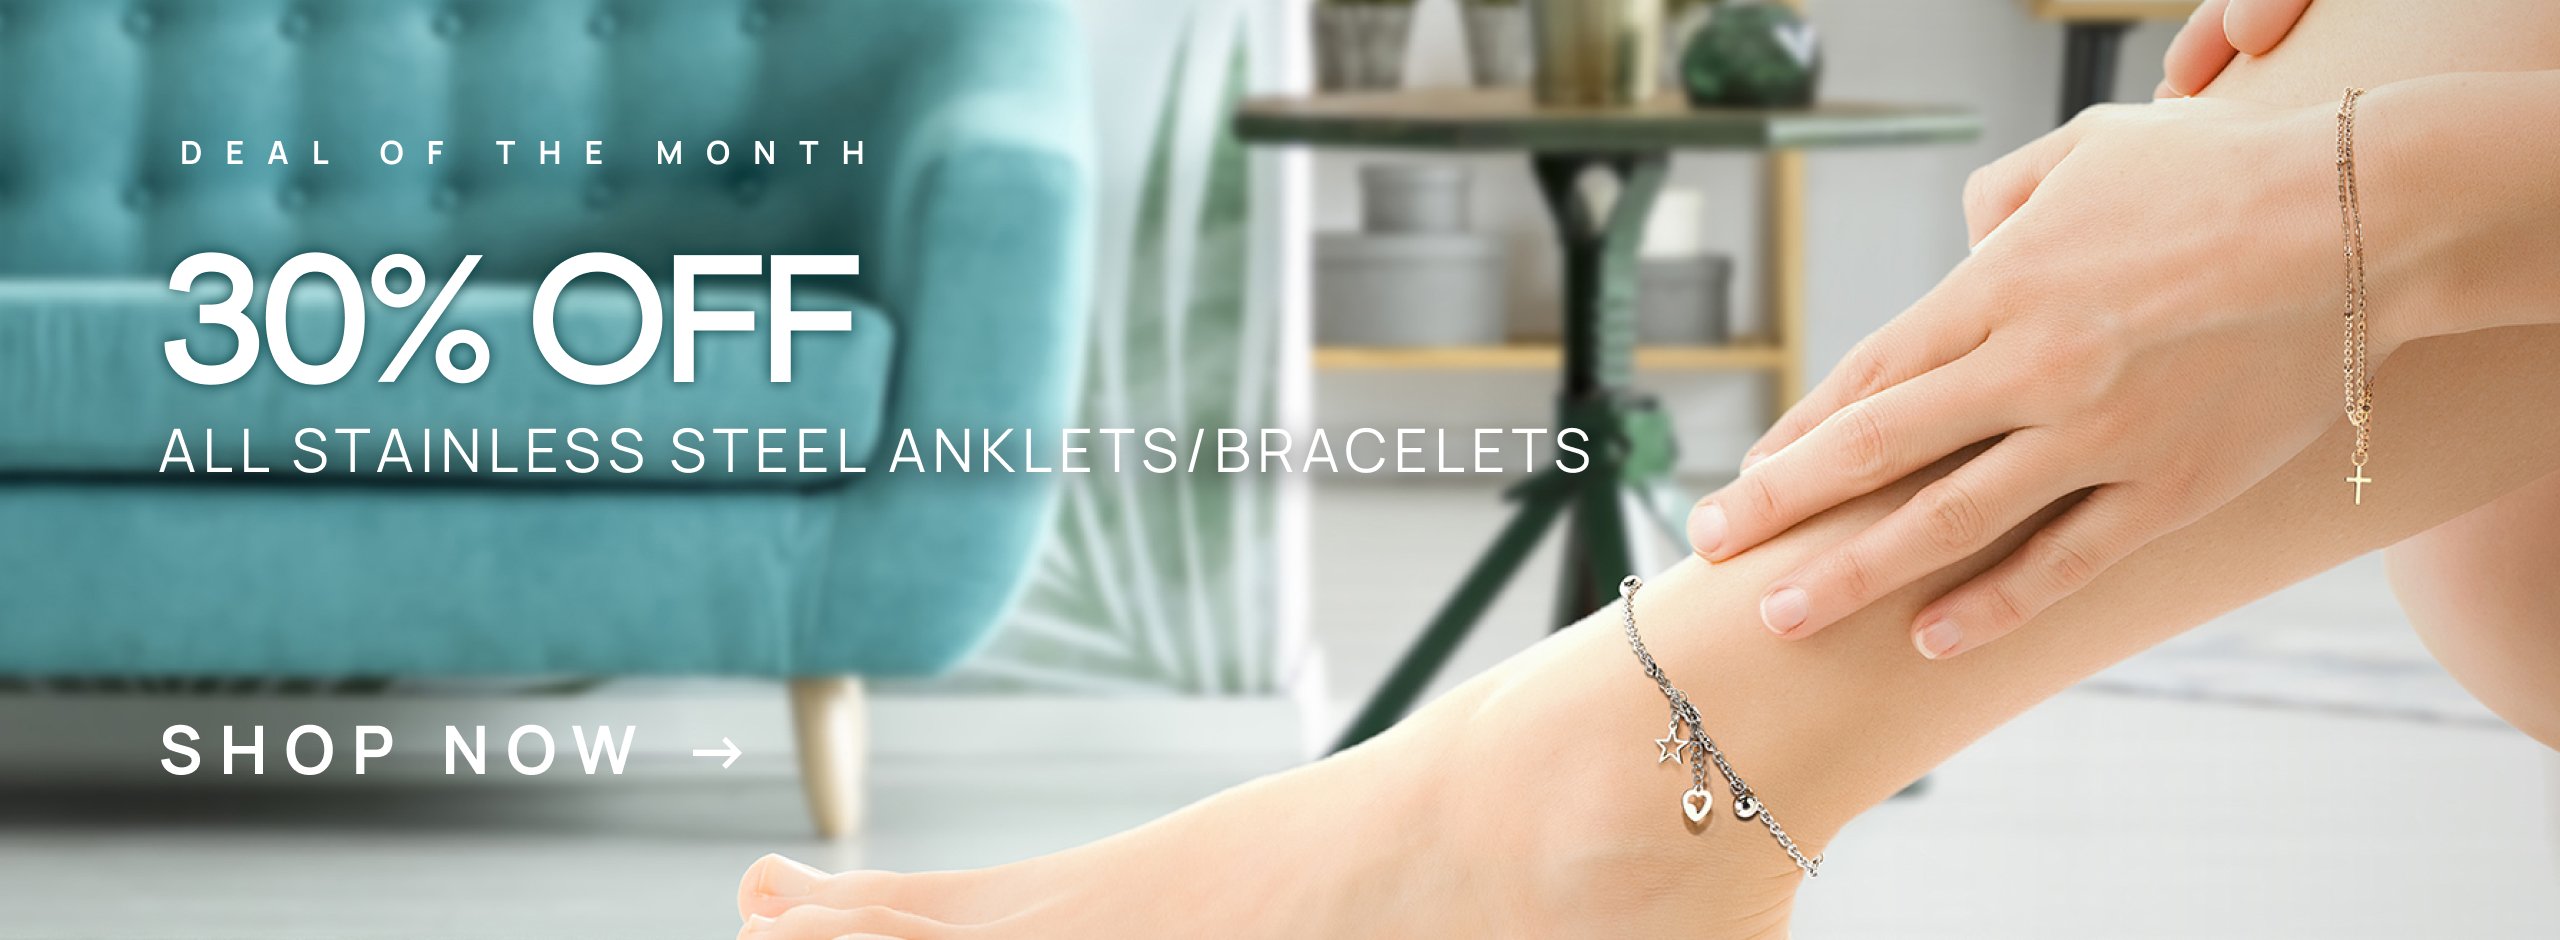 30% off adjustable-length stainless steel jewelry featuring our most popular designs that can be worn as both anklets and bracelets.